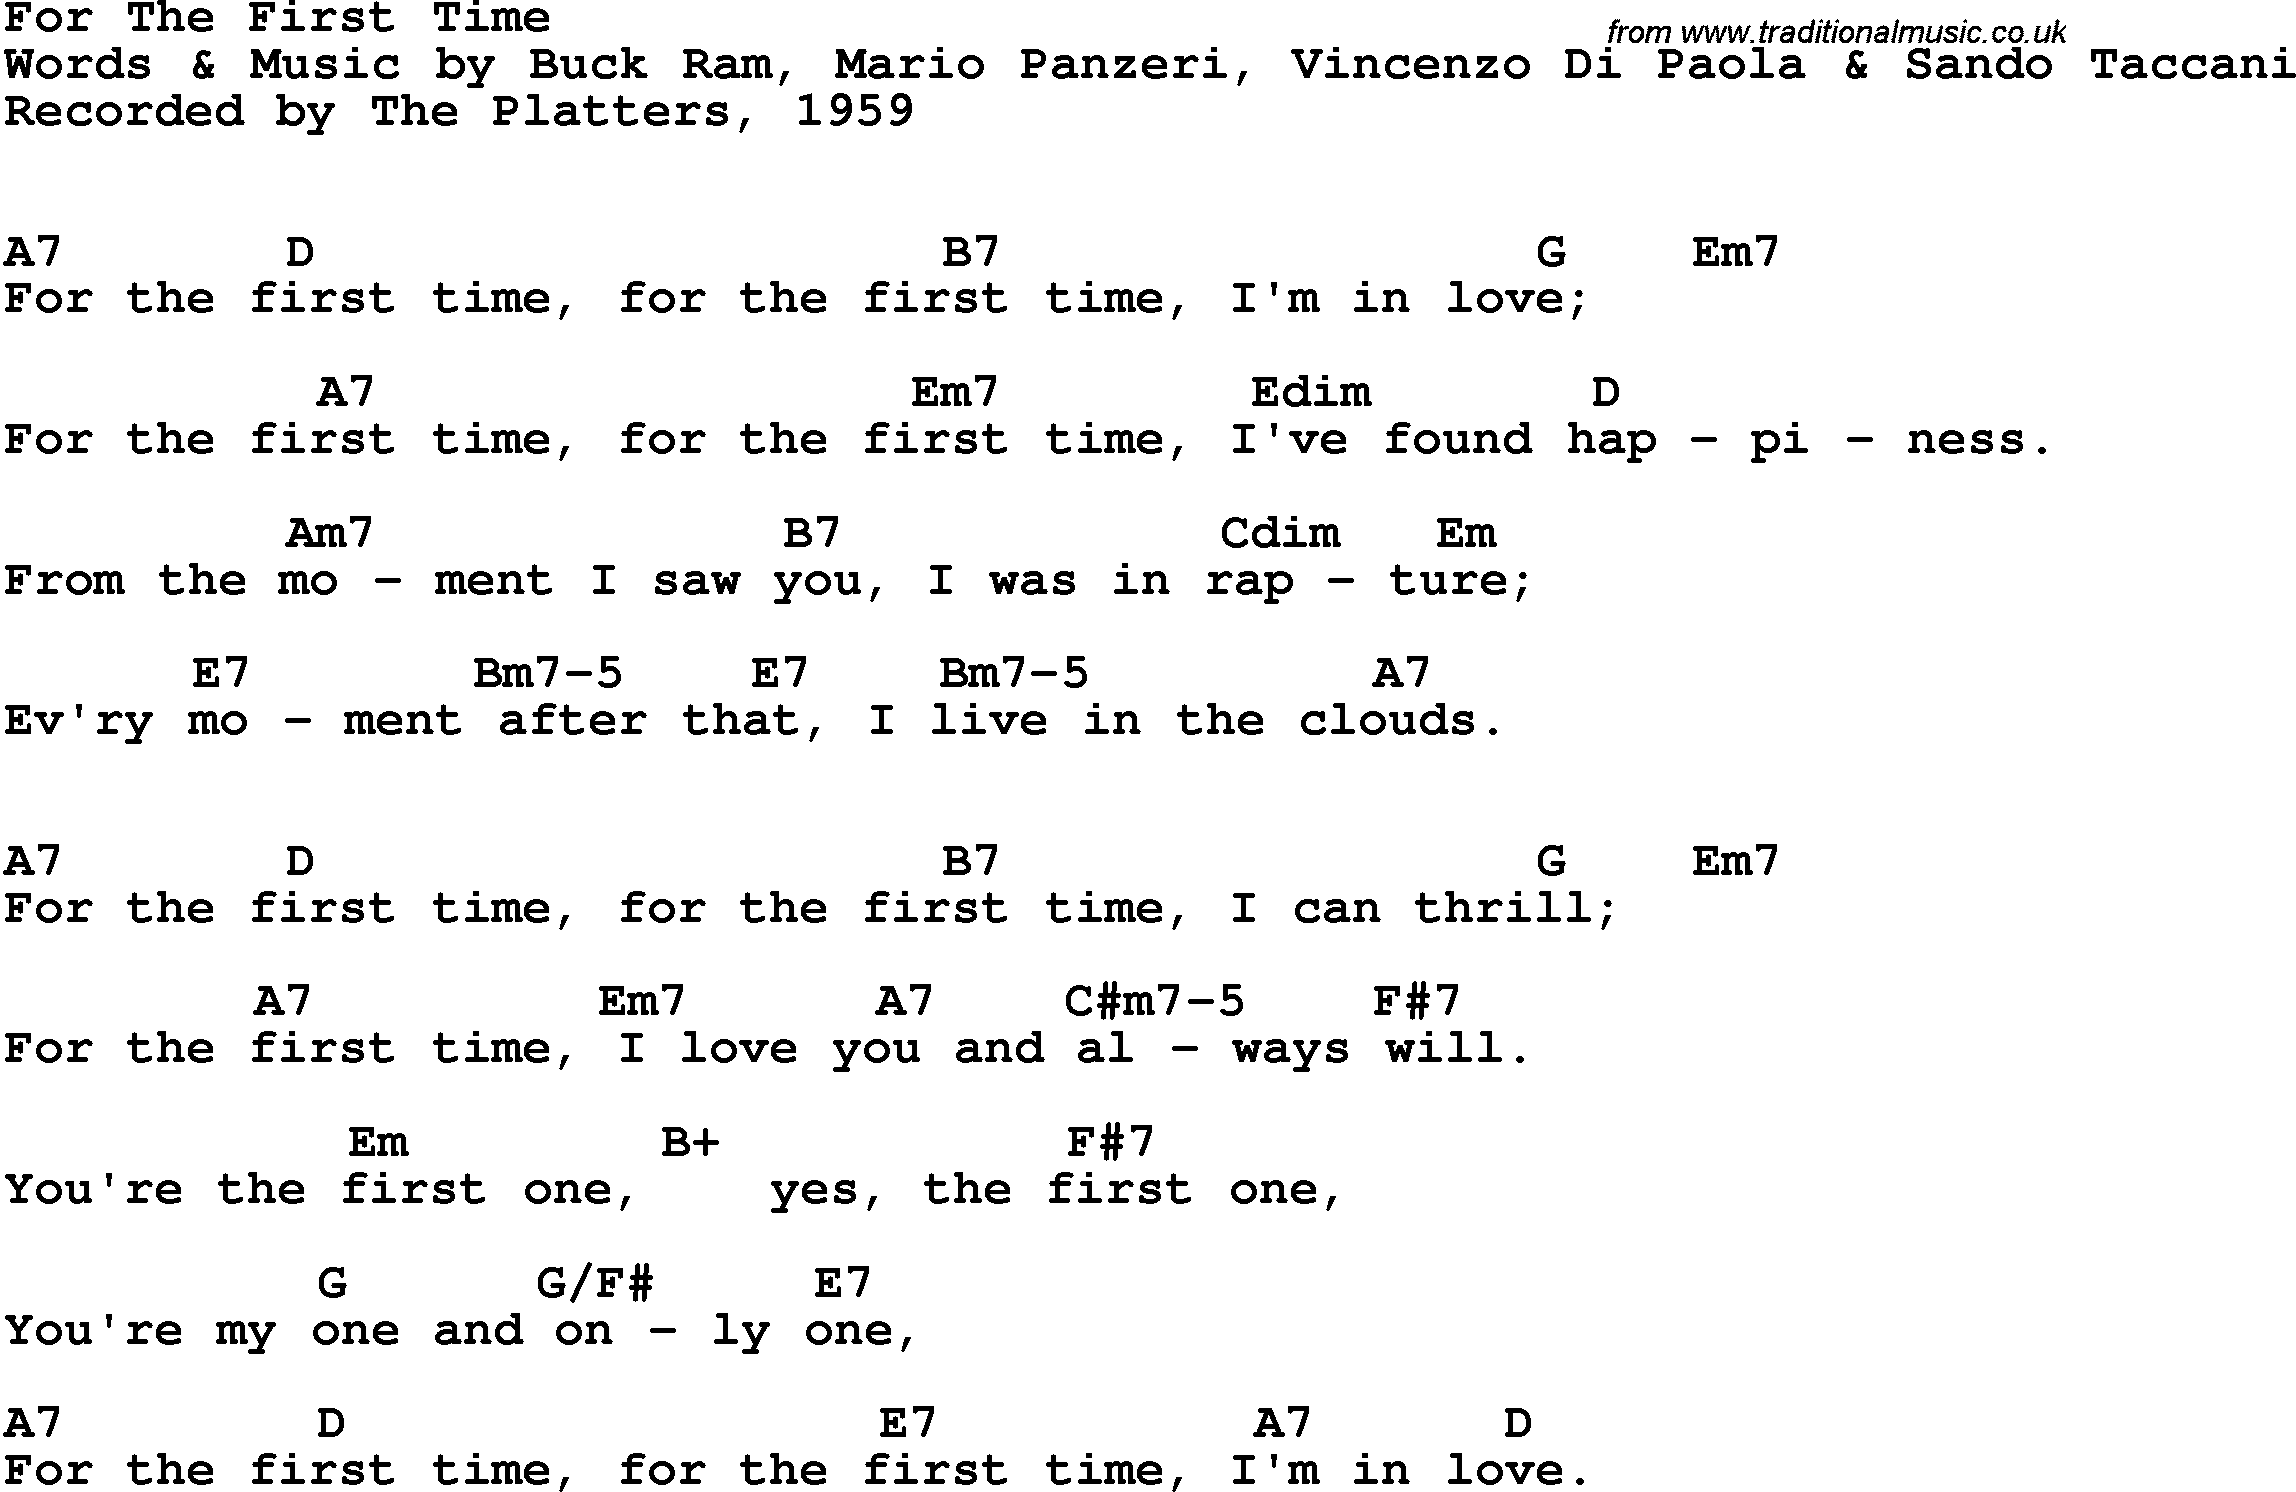 Song Lyrics with guitar chords for For The First Time - The Platters, 1959